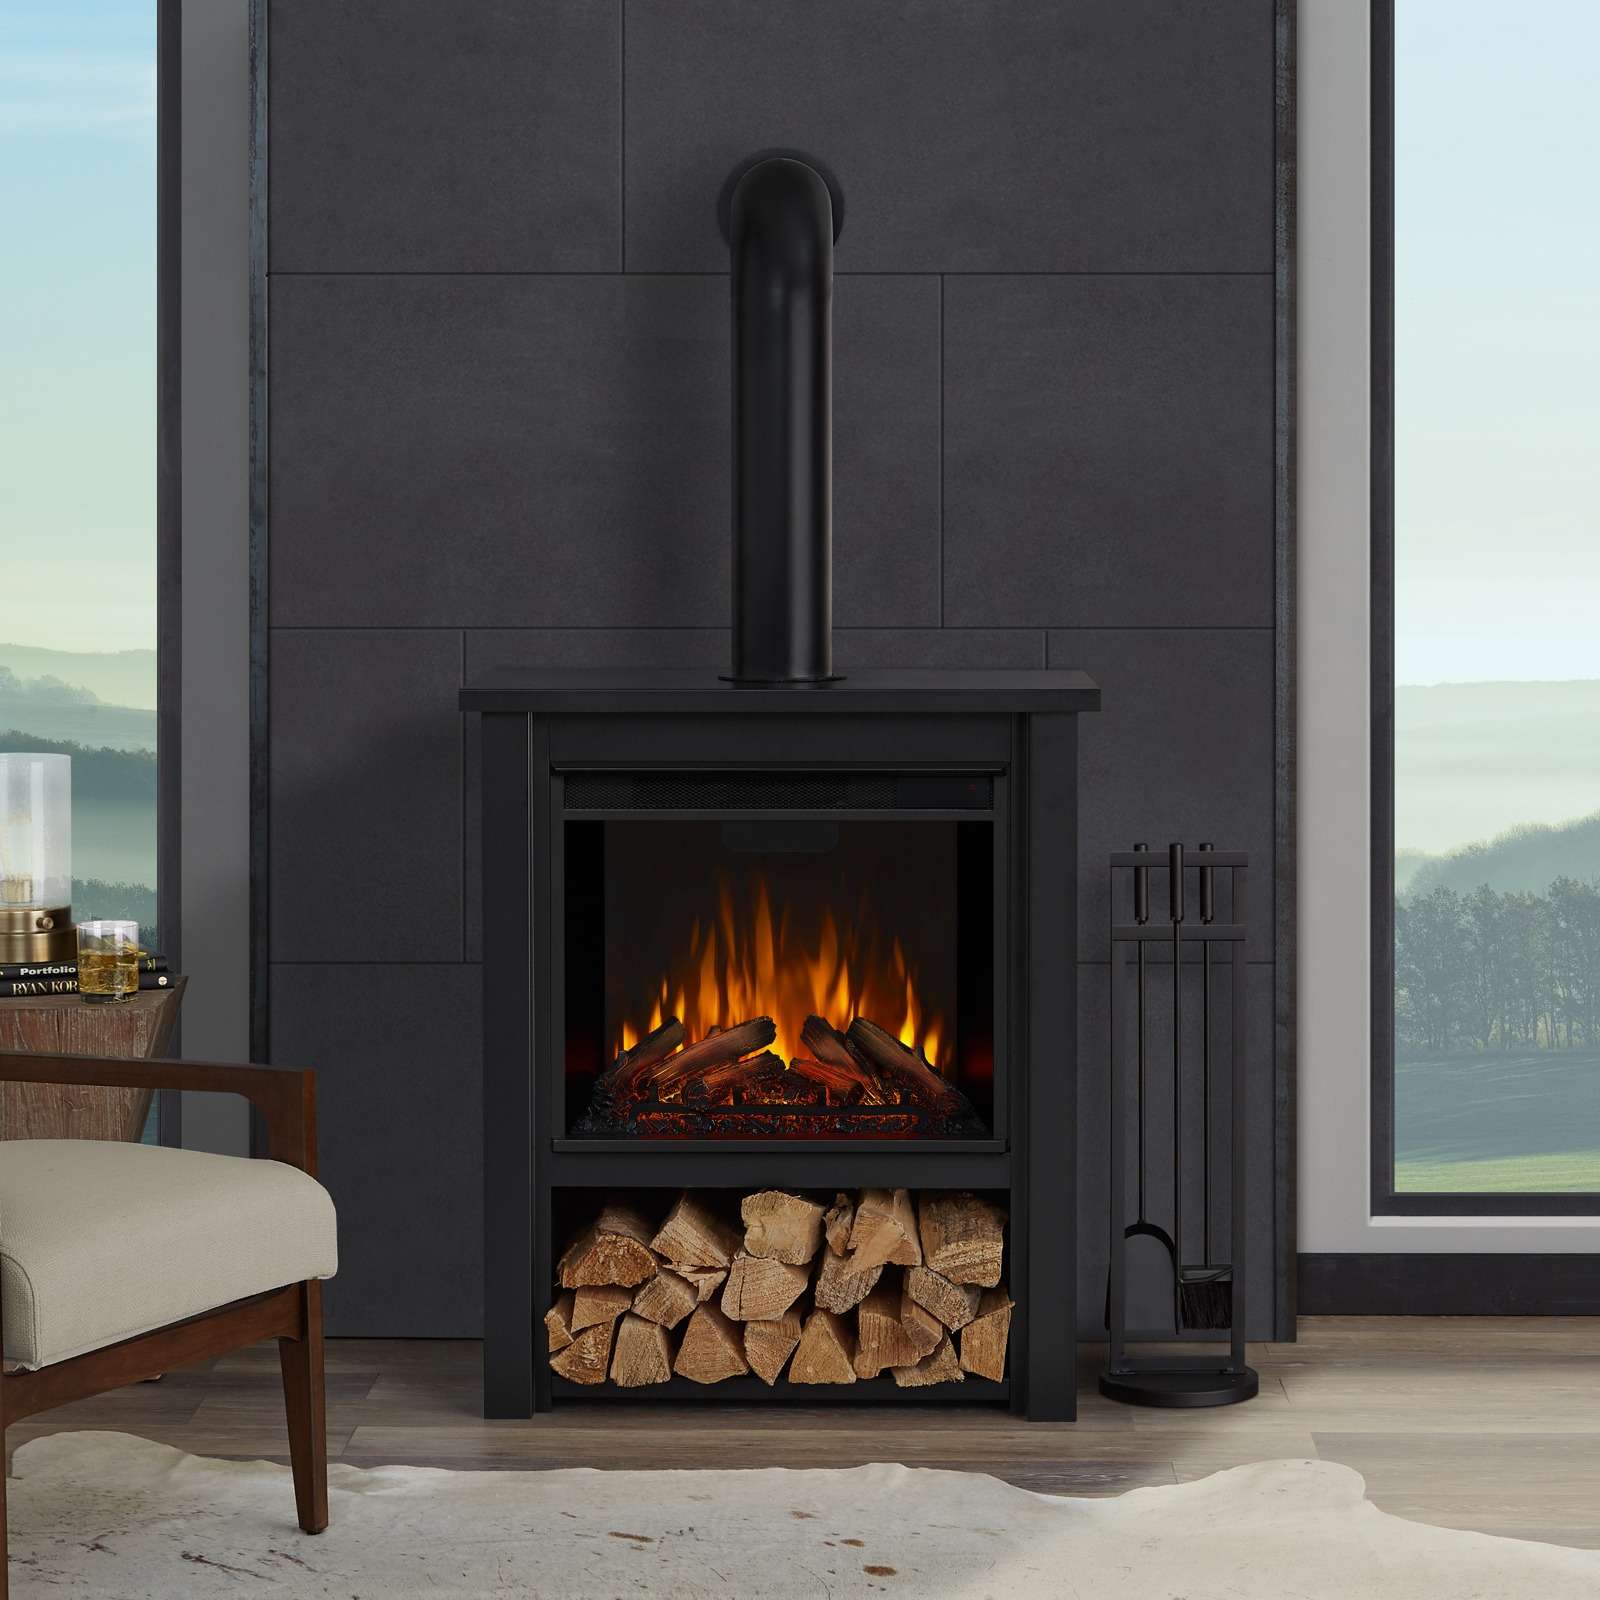 Hollis Electric Fireplace Indoor, Electric Fireplace Heater Realistic Flame And Logs With Glowing Embers